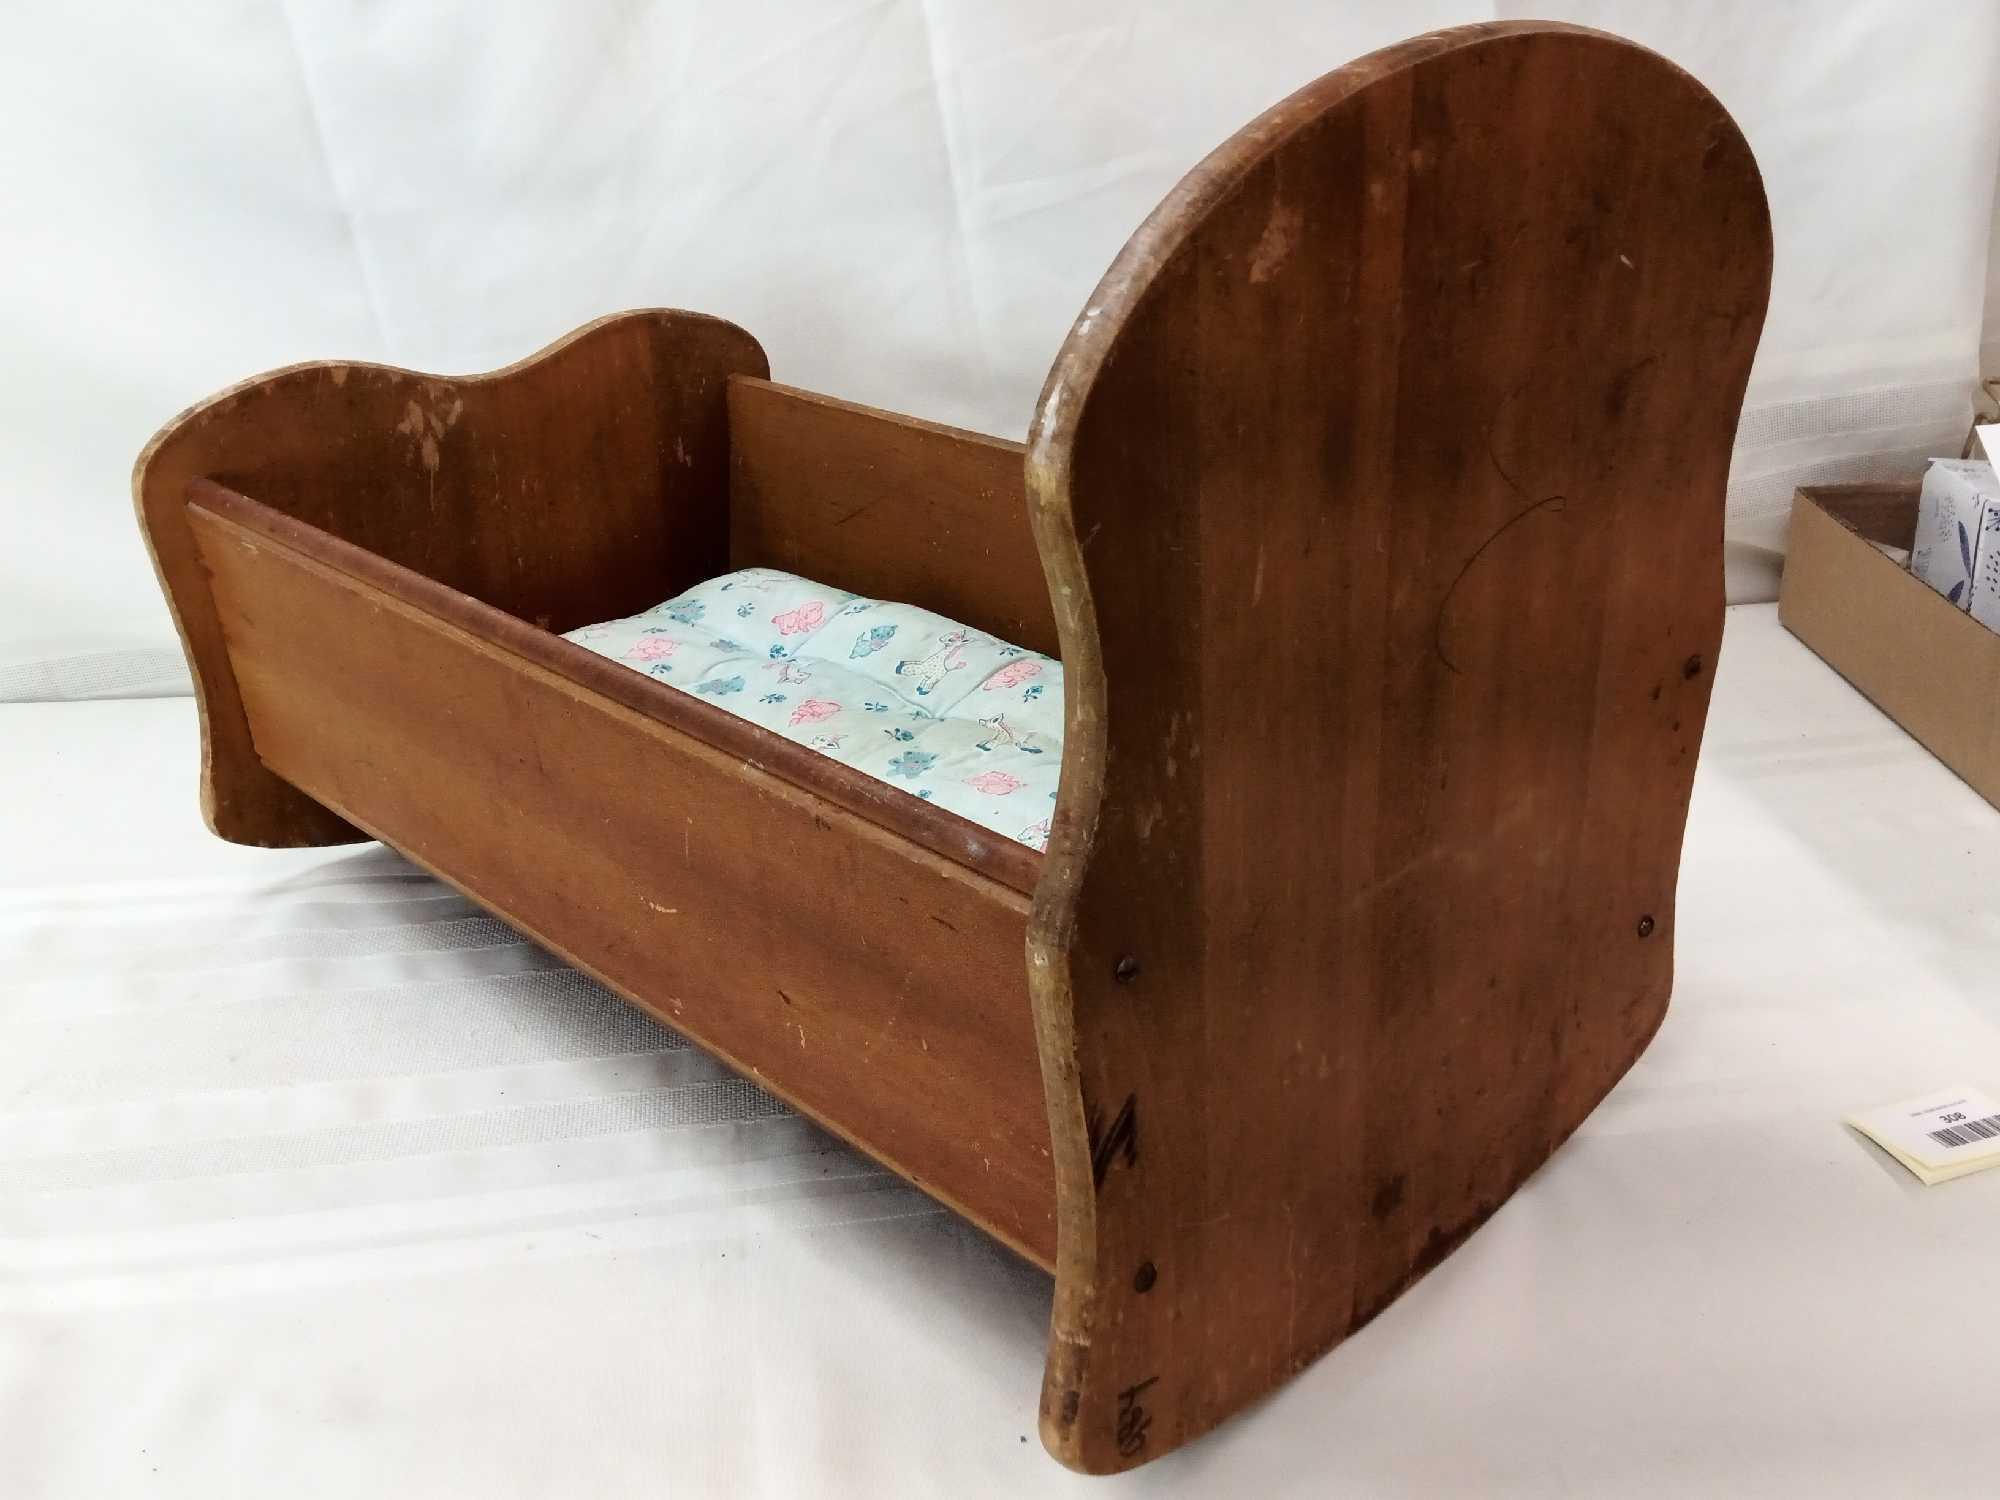 VINTAGE WOODEN DOLL ROCKING CRADLE SOME CRAYON SCRIBBLES. 20"X12"X14" PICK UP ONLY